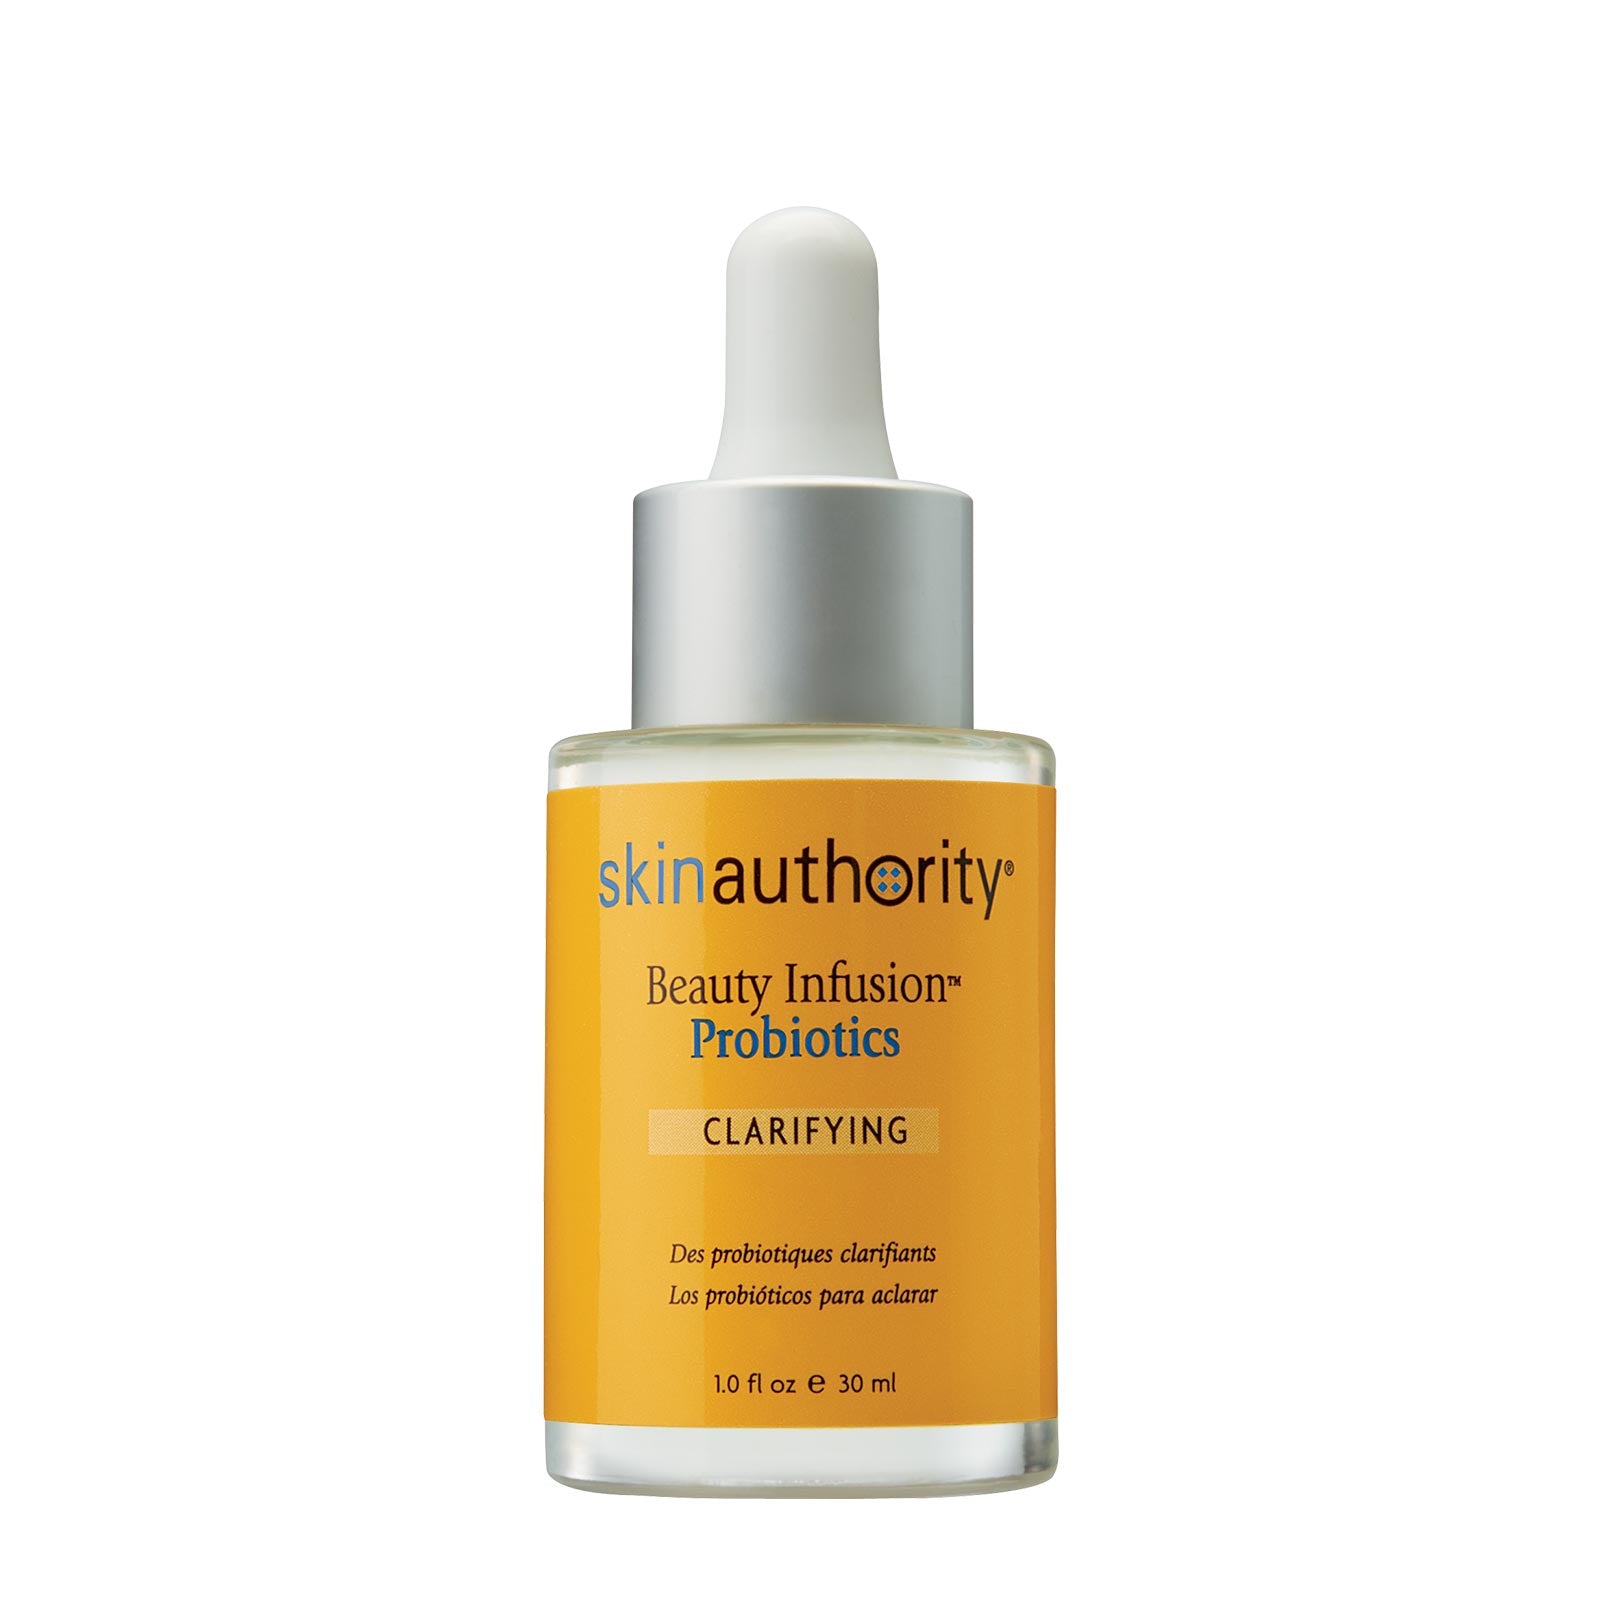 Beauty Infusion Probiotics for Clarifying by Skin Authority